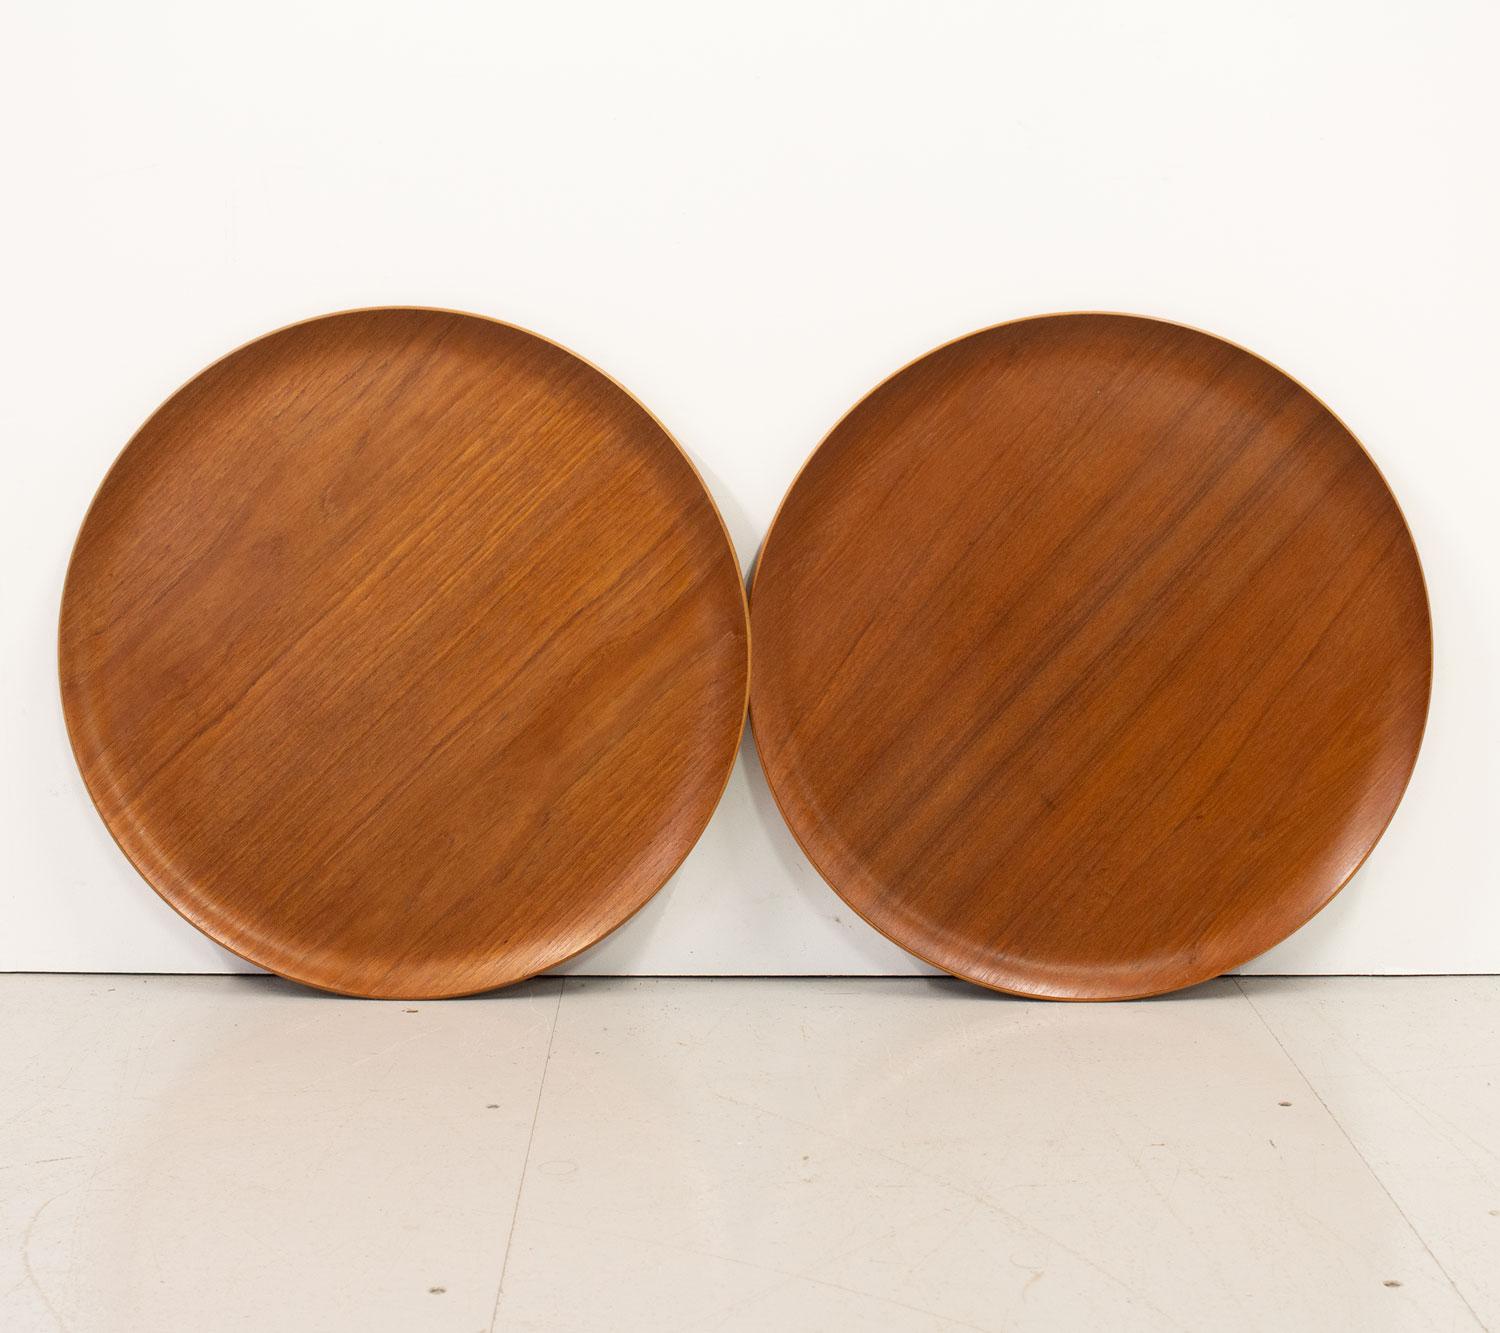 Pair of Danish teak model 4508 tray tables designed by H. Engholm & Svend Åge Willumsen. Originally created for the staff of Fritz Hansen in 1958 it was so popular that is was later put into production for sale to the public. The clever and